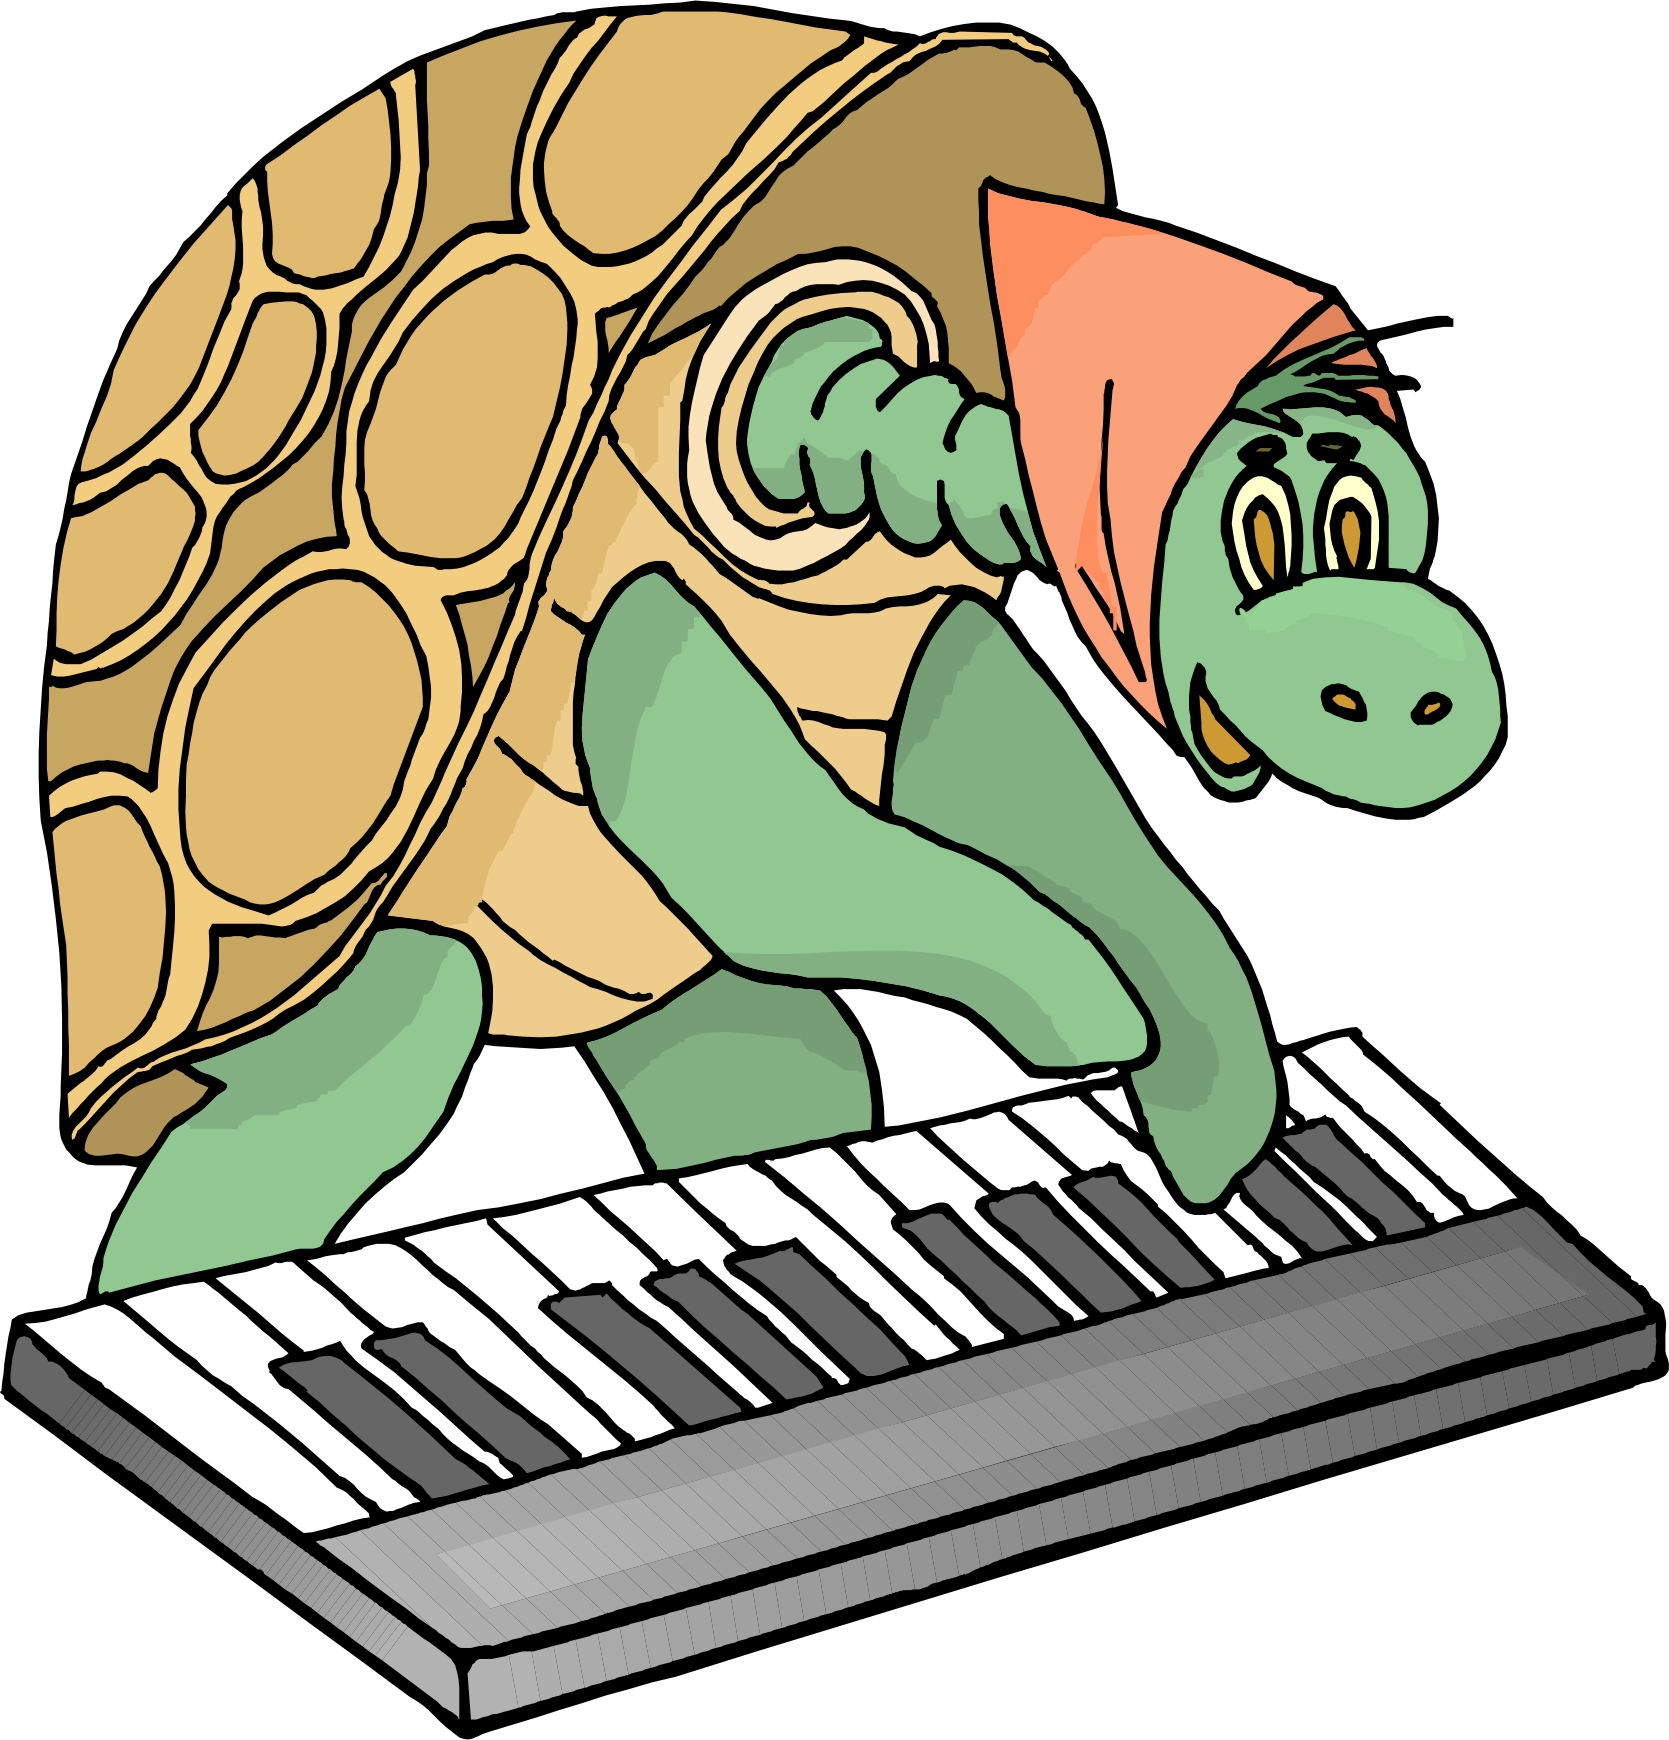 Playing Piano Cartoon Images & Pictures - Becuo